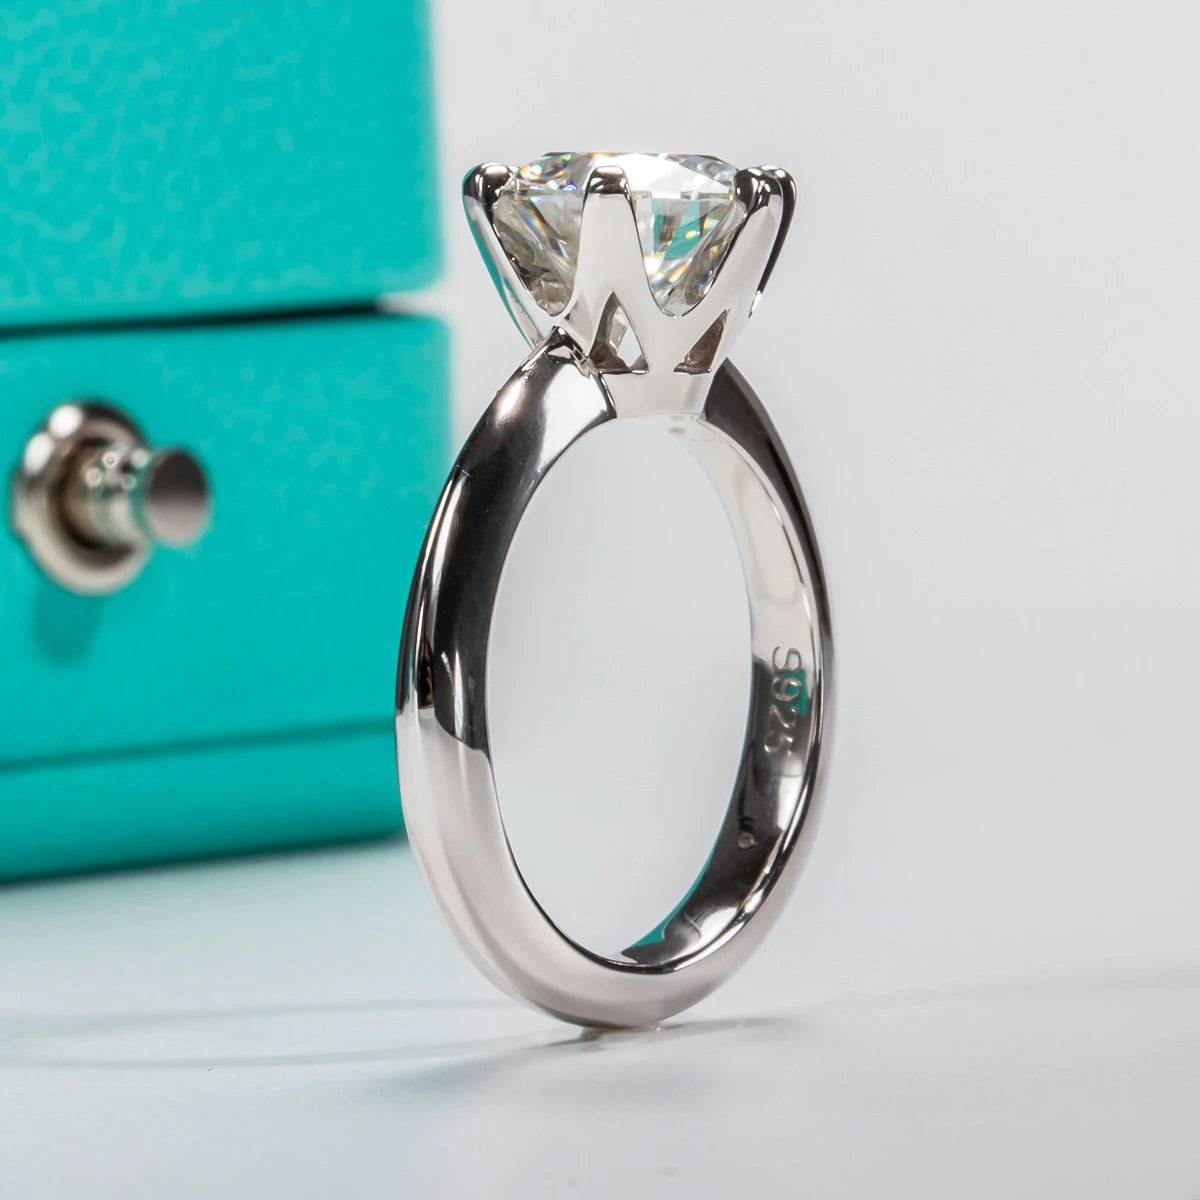 A Moissanite Solitaire Ring: Stunning Engagement Jewelry from Maramalive™ with a silver engagement ring featuring a solitaire design and a large moissanite center stone is displayed upright near a blue box.